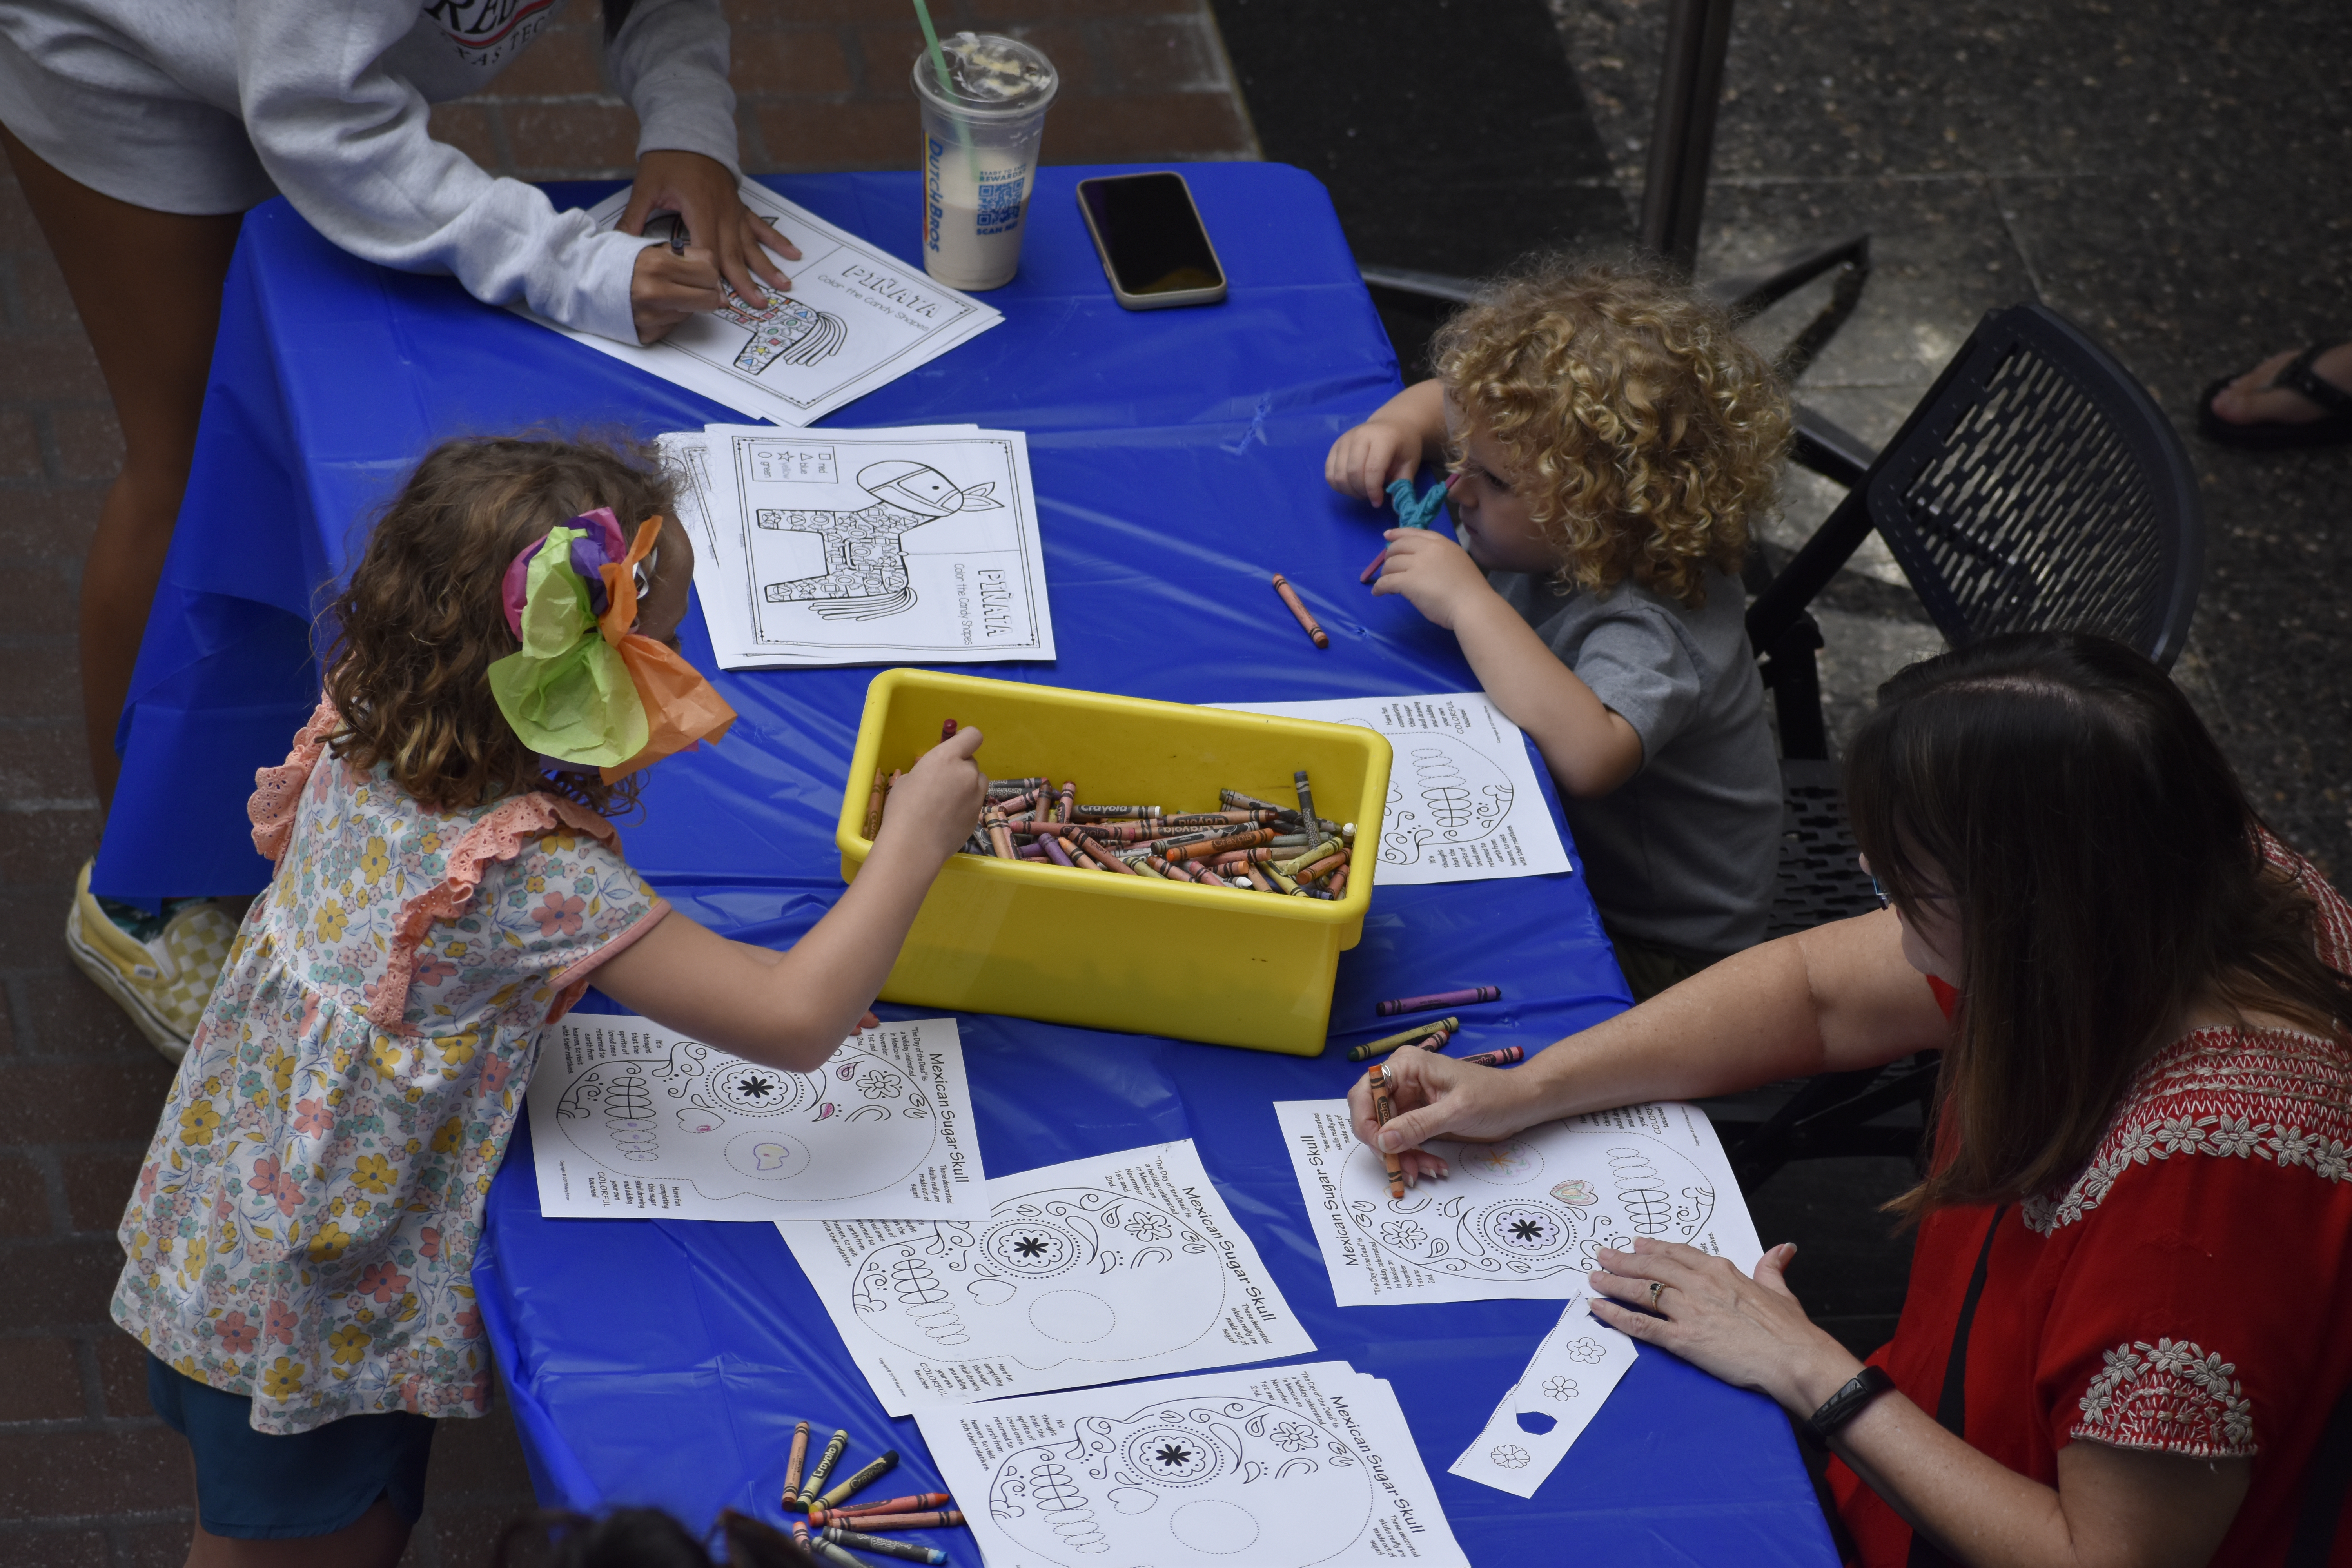 Two adults and children drawing and coloring sugar skulls.